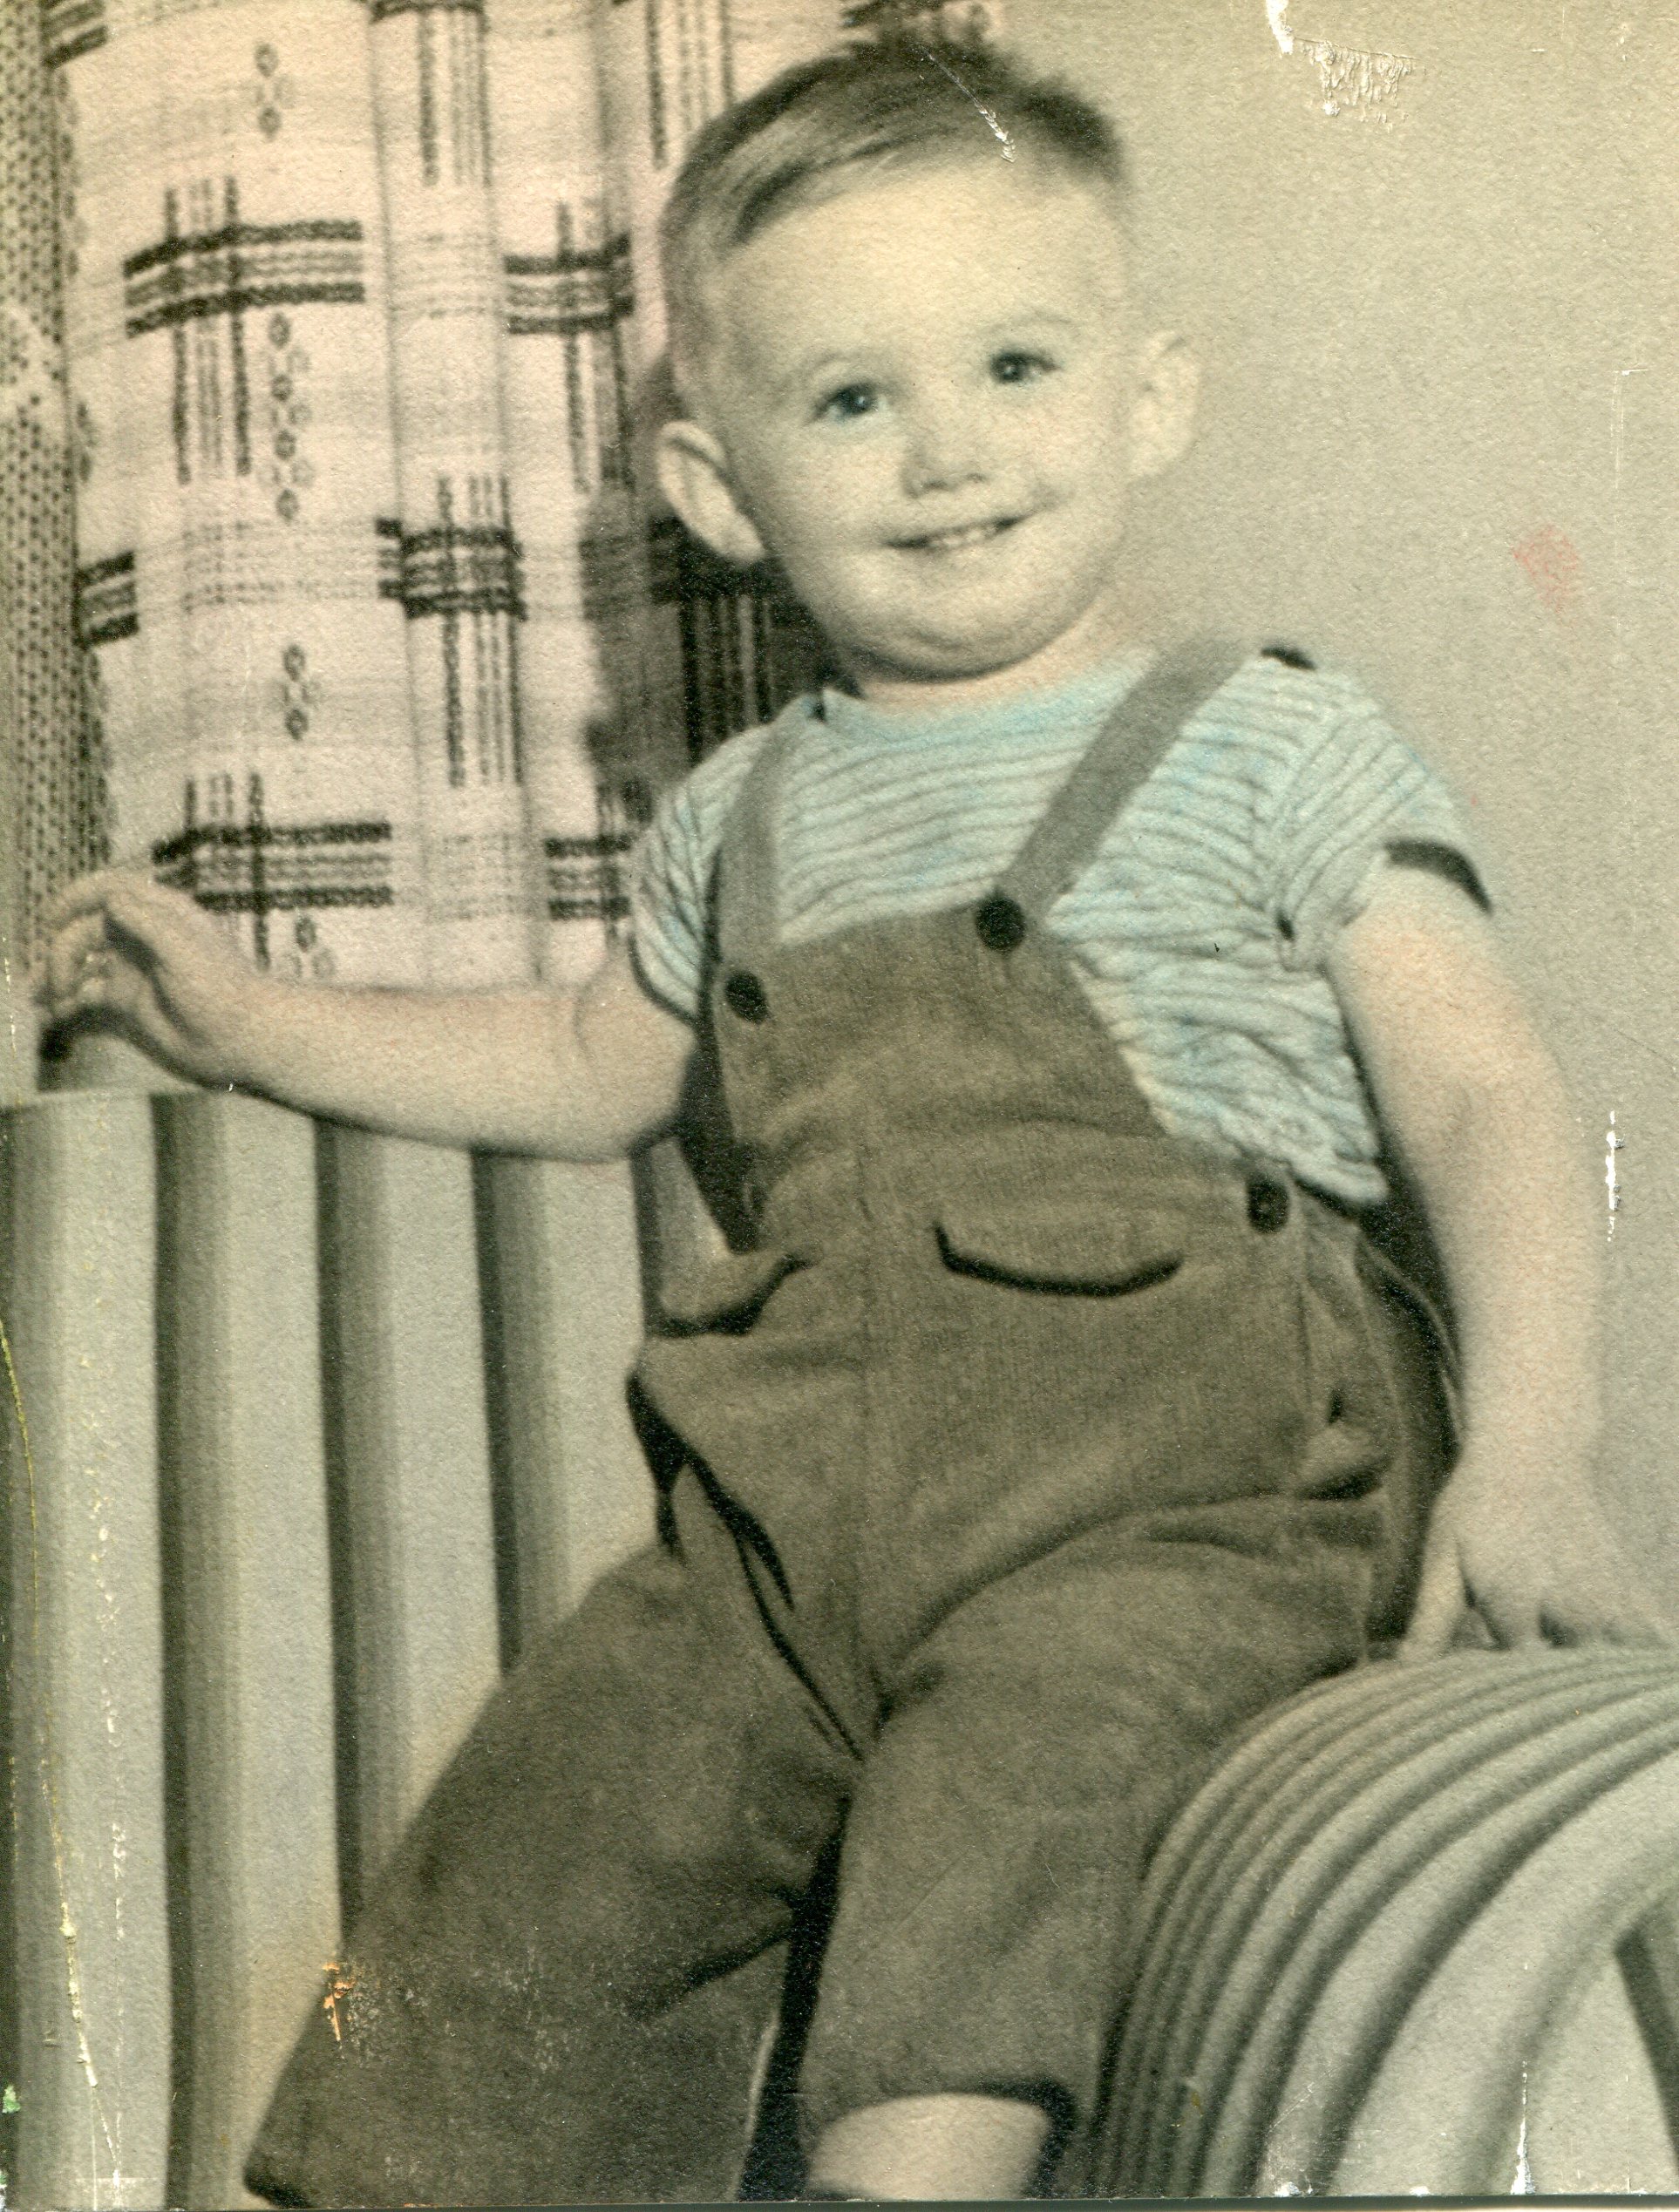 Eric Mussen, one year old in 1945. (Family photo)